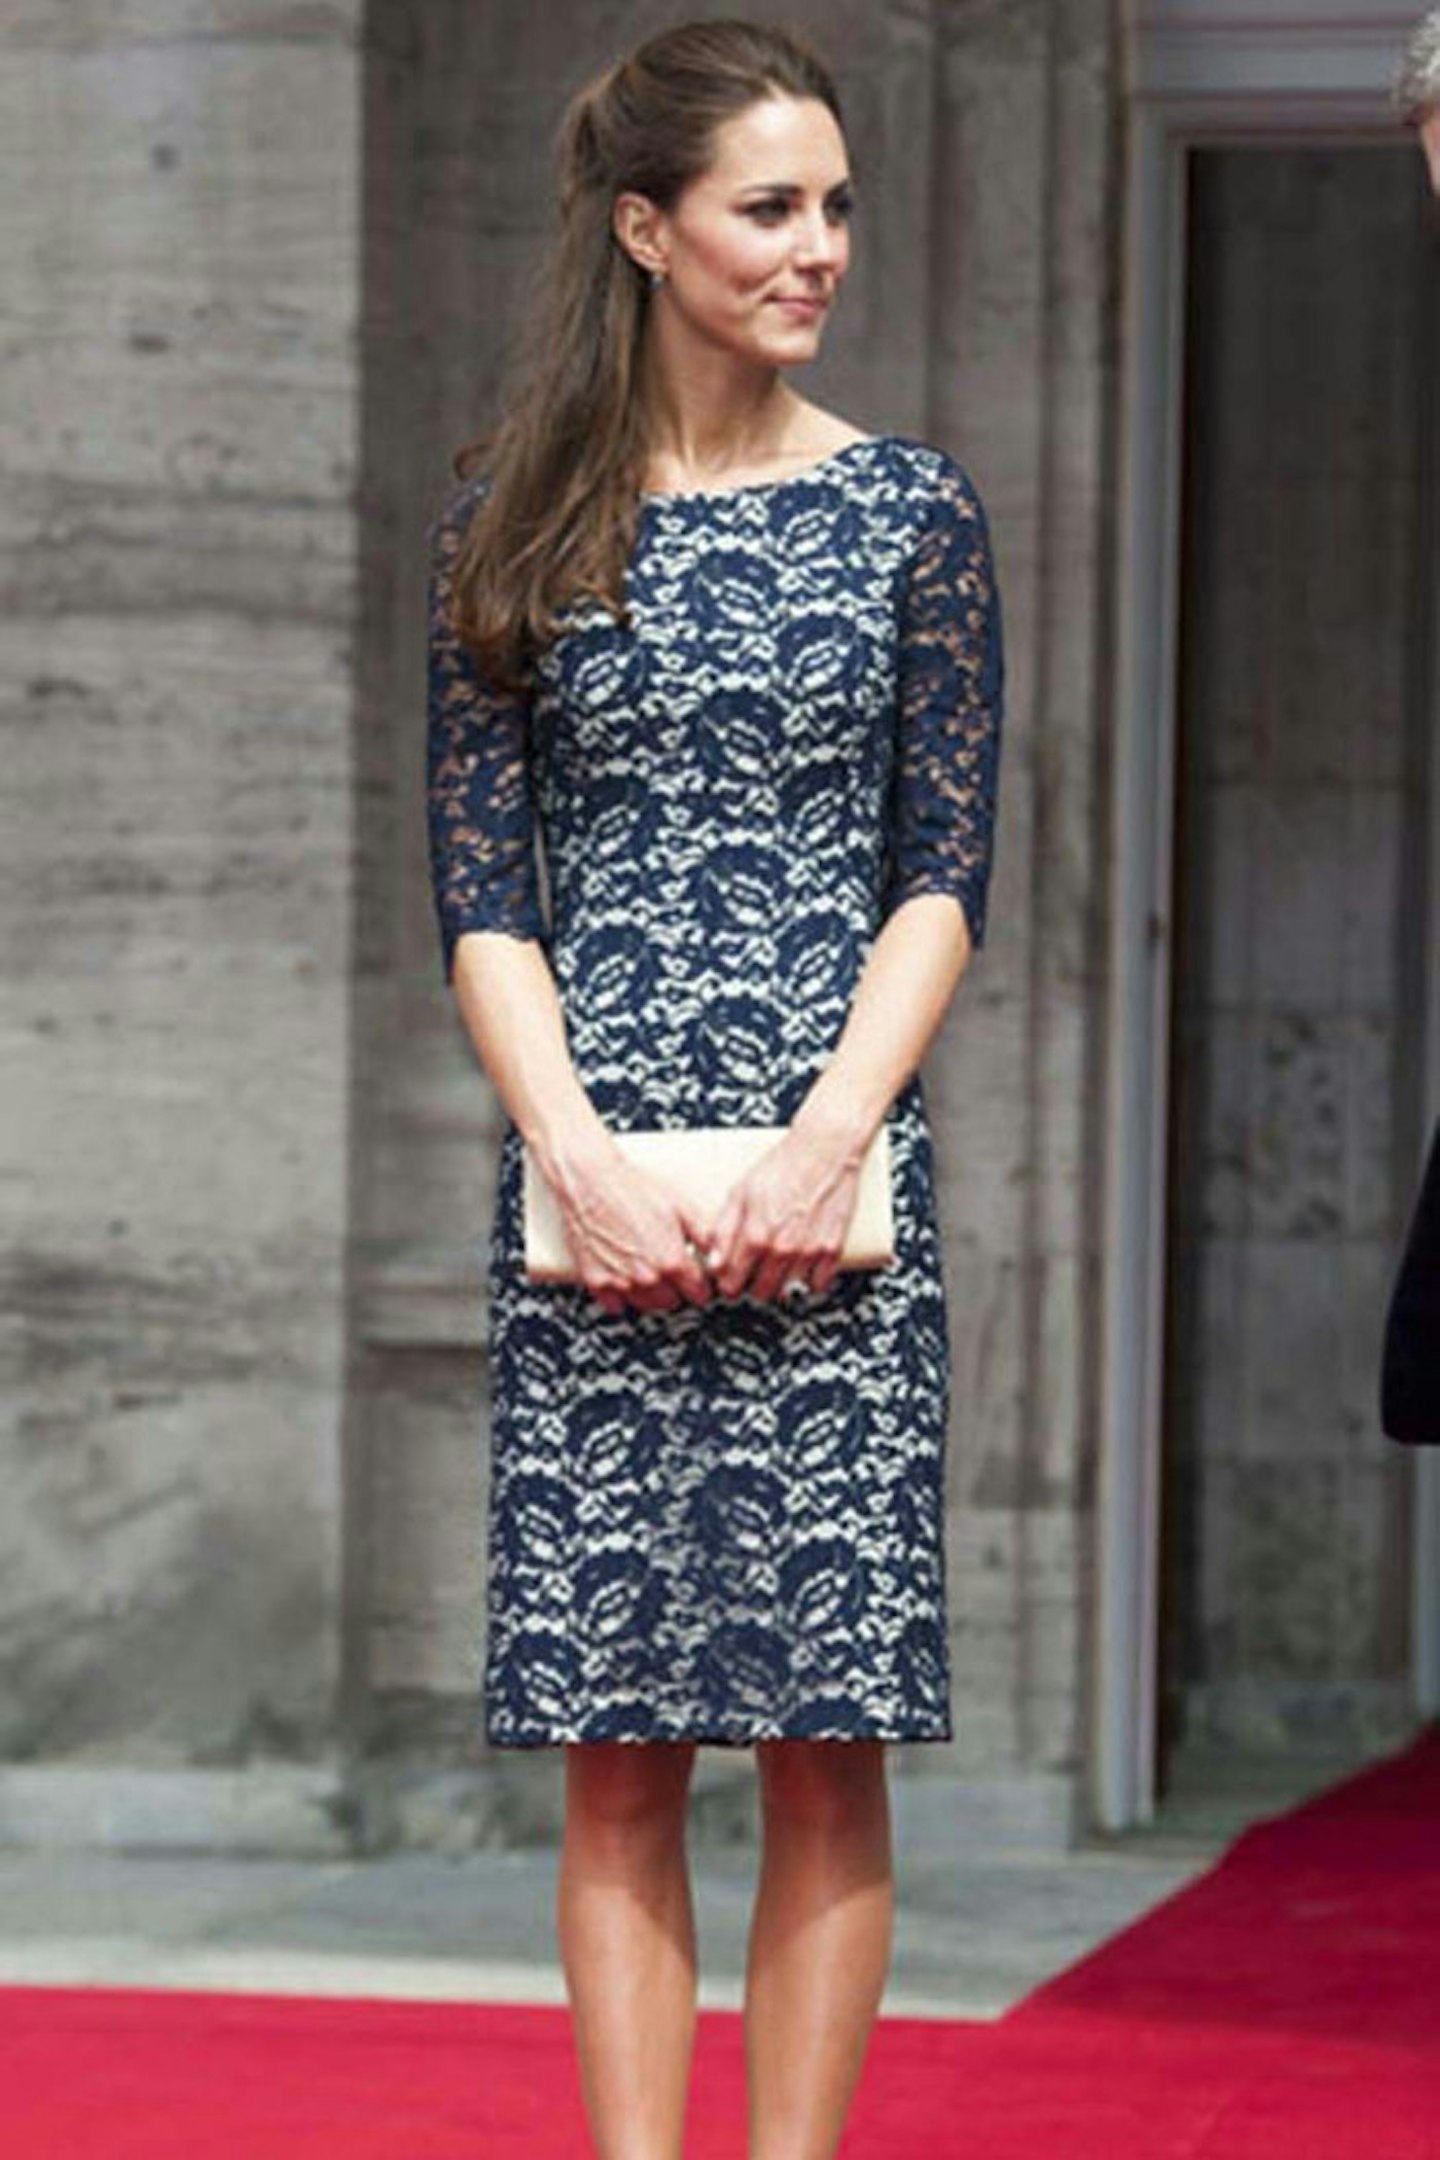 Kate Middleton visiting the official residence of the Governer General of Canada, wearing Erdem dress, July 2011